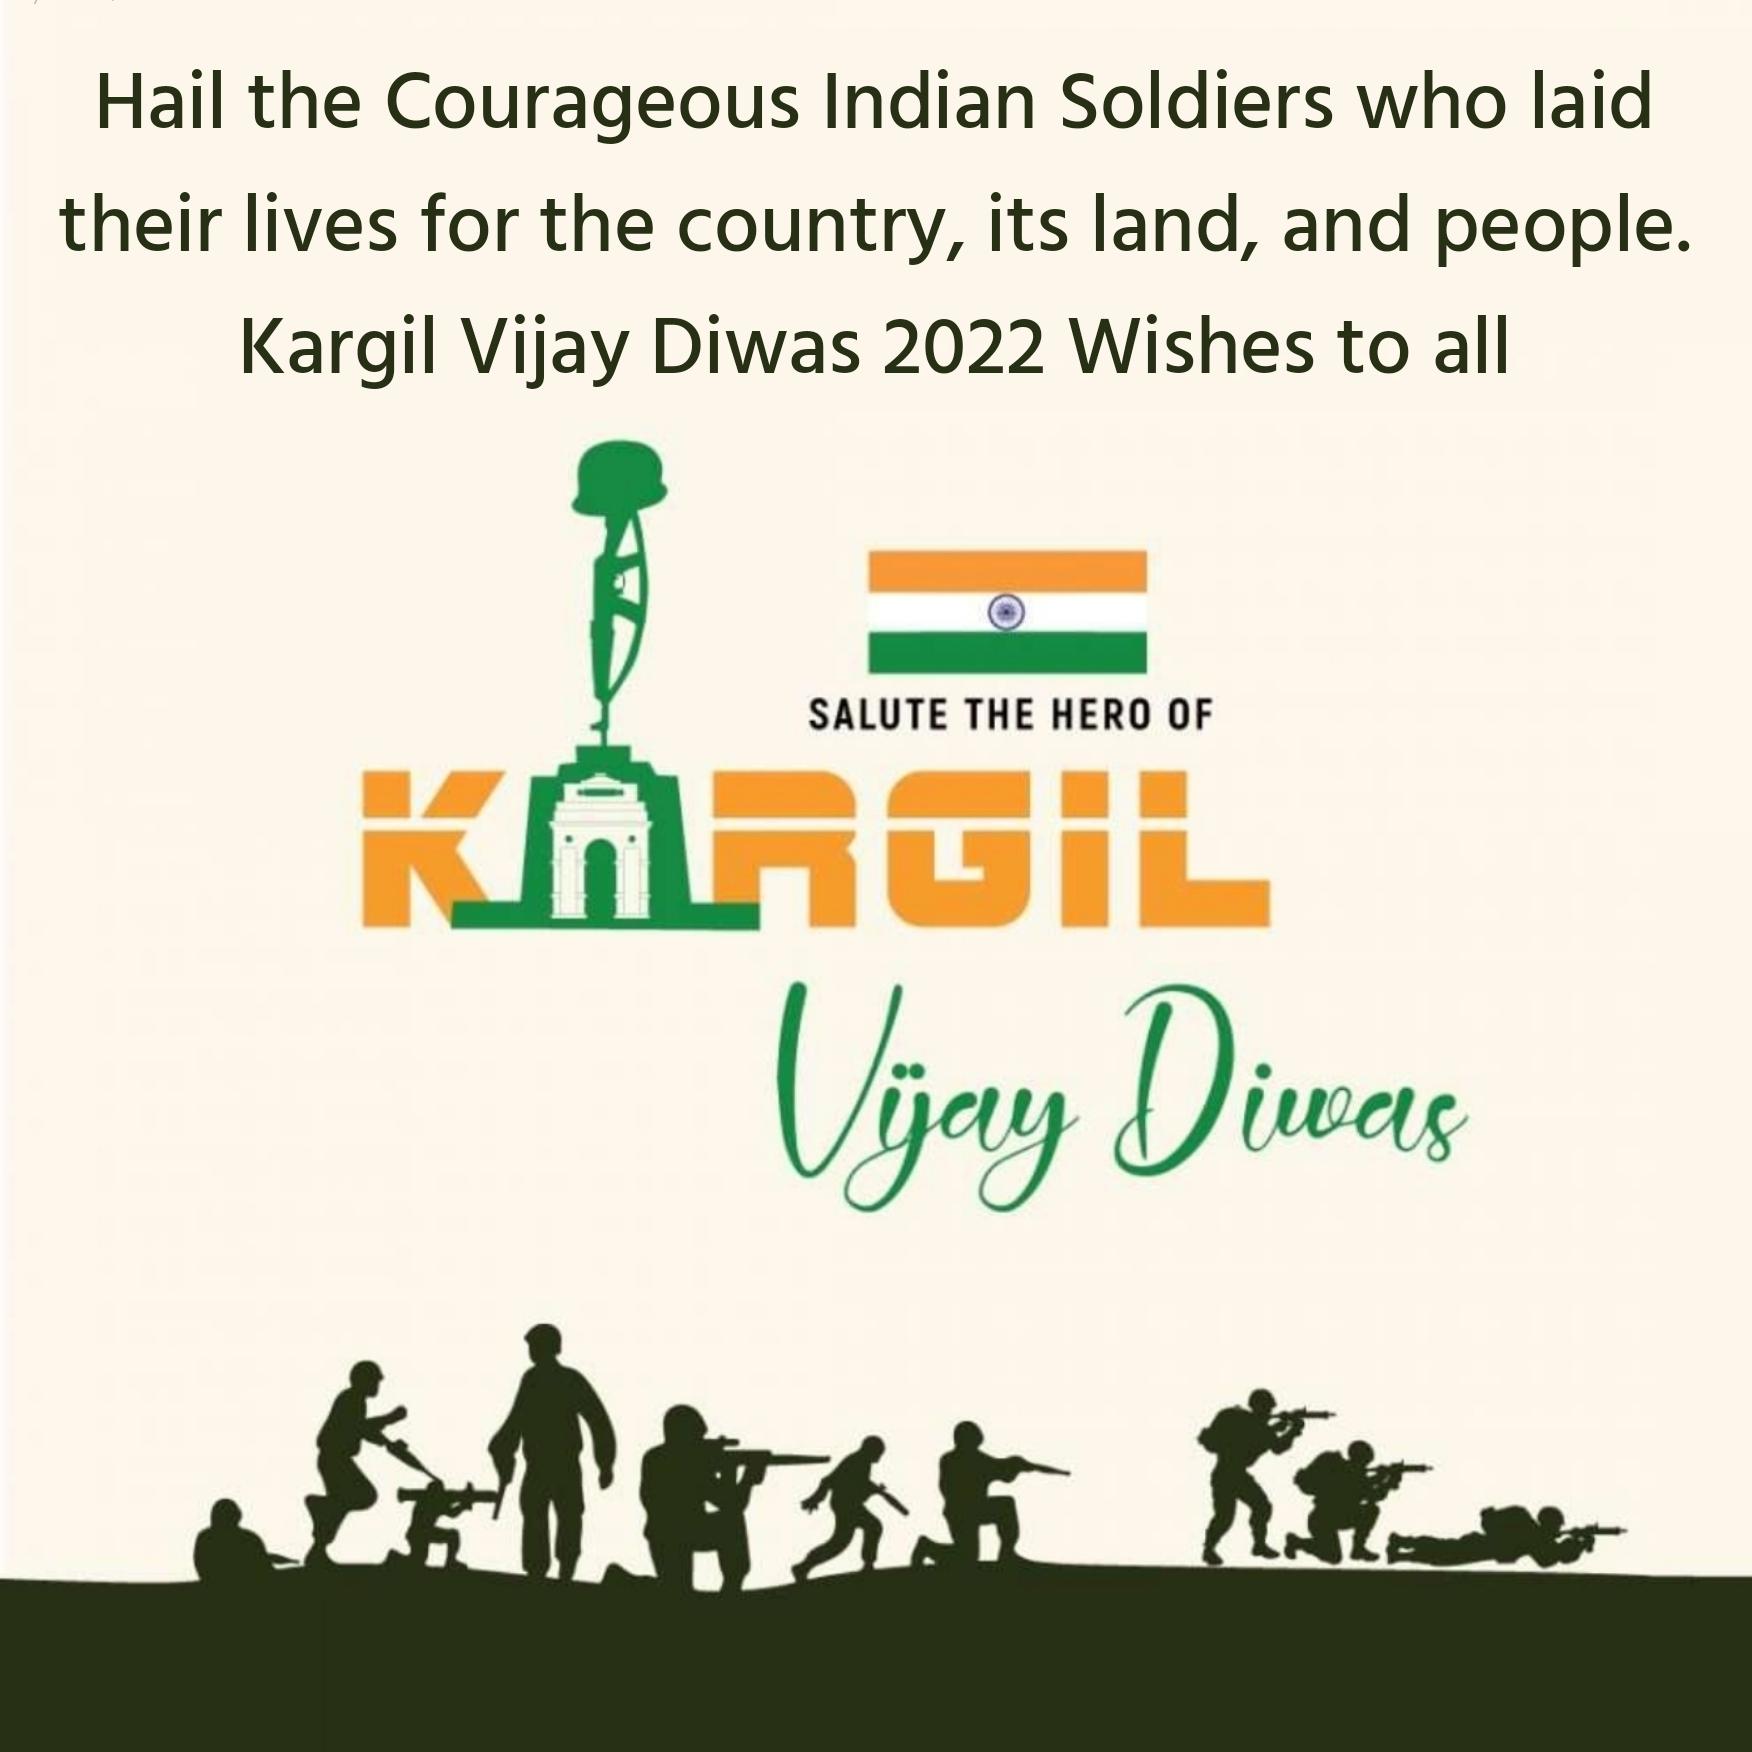 Hail the Courageous Indian Soldiers who laid their lives for the country